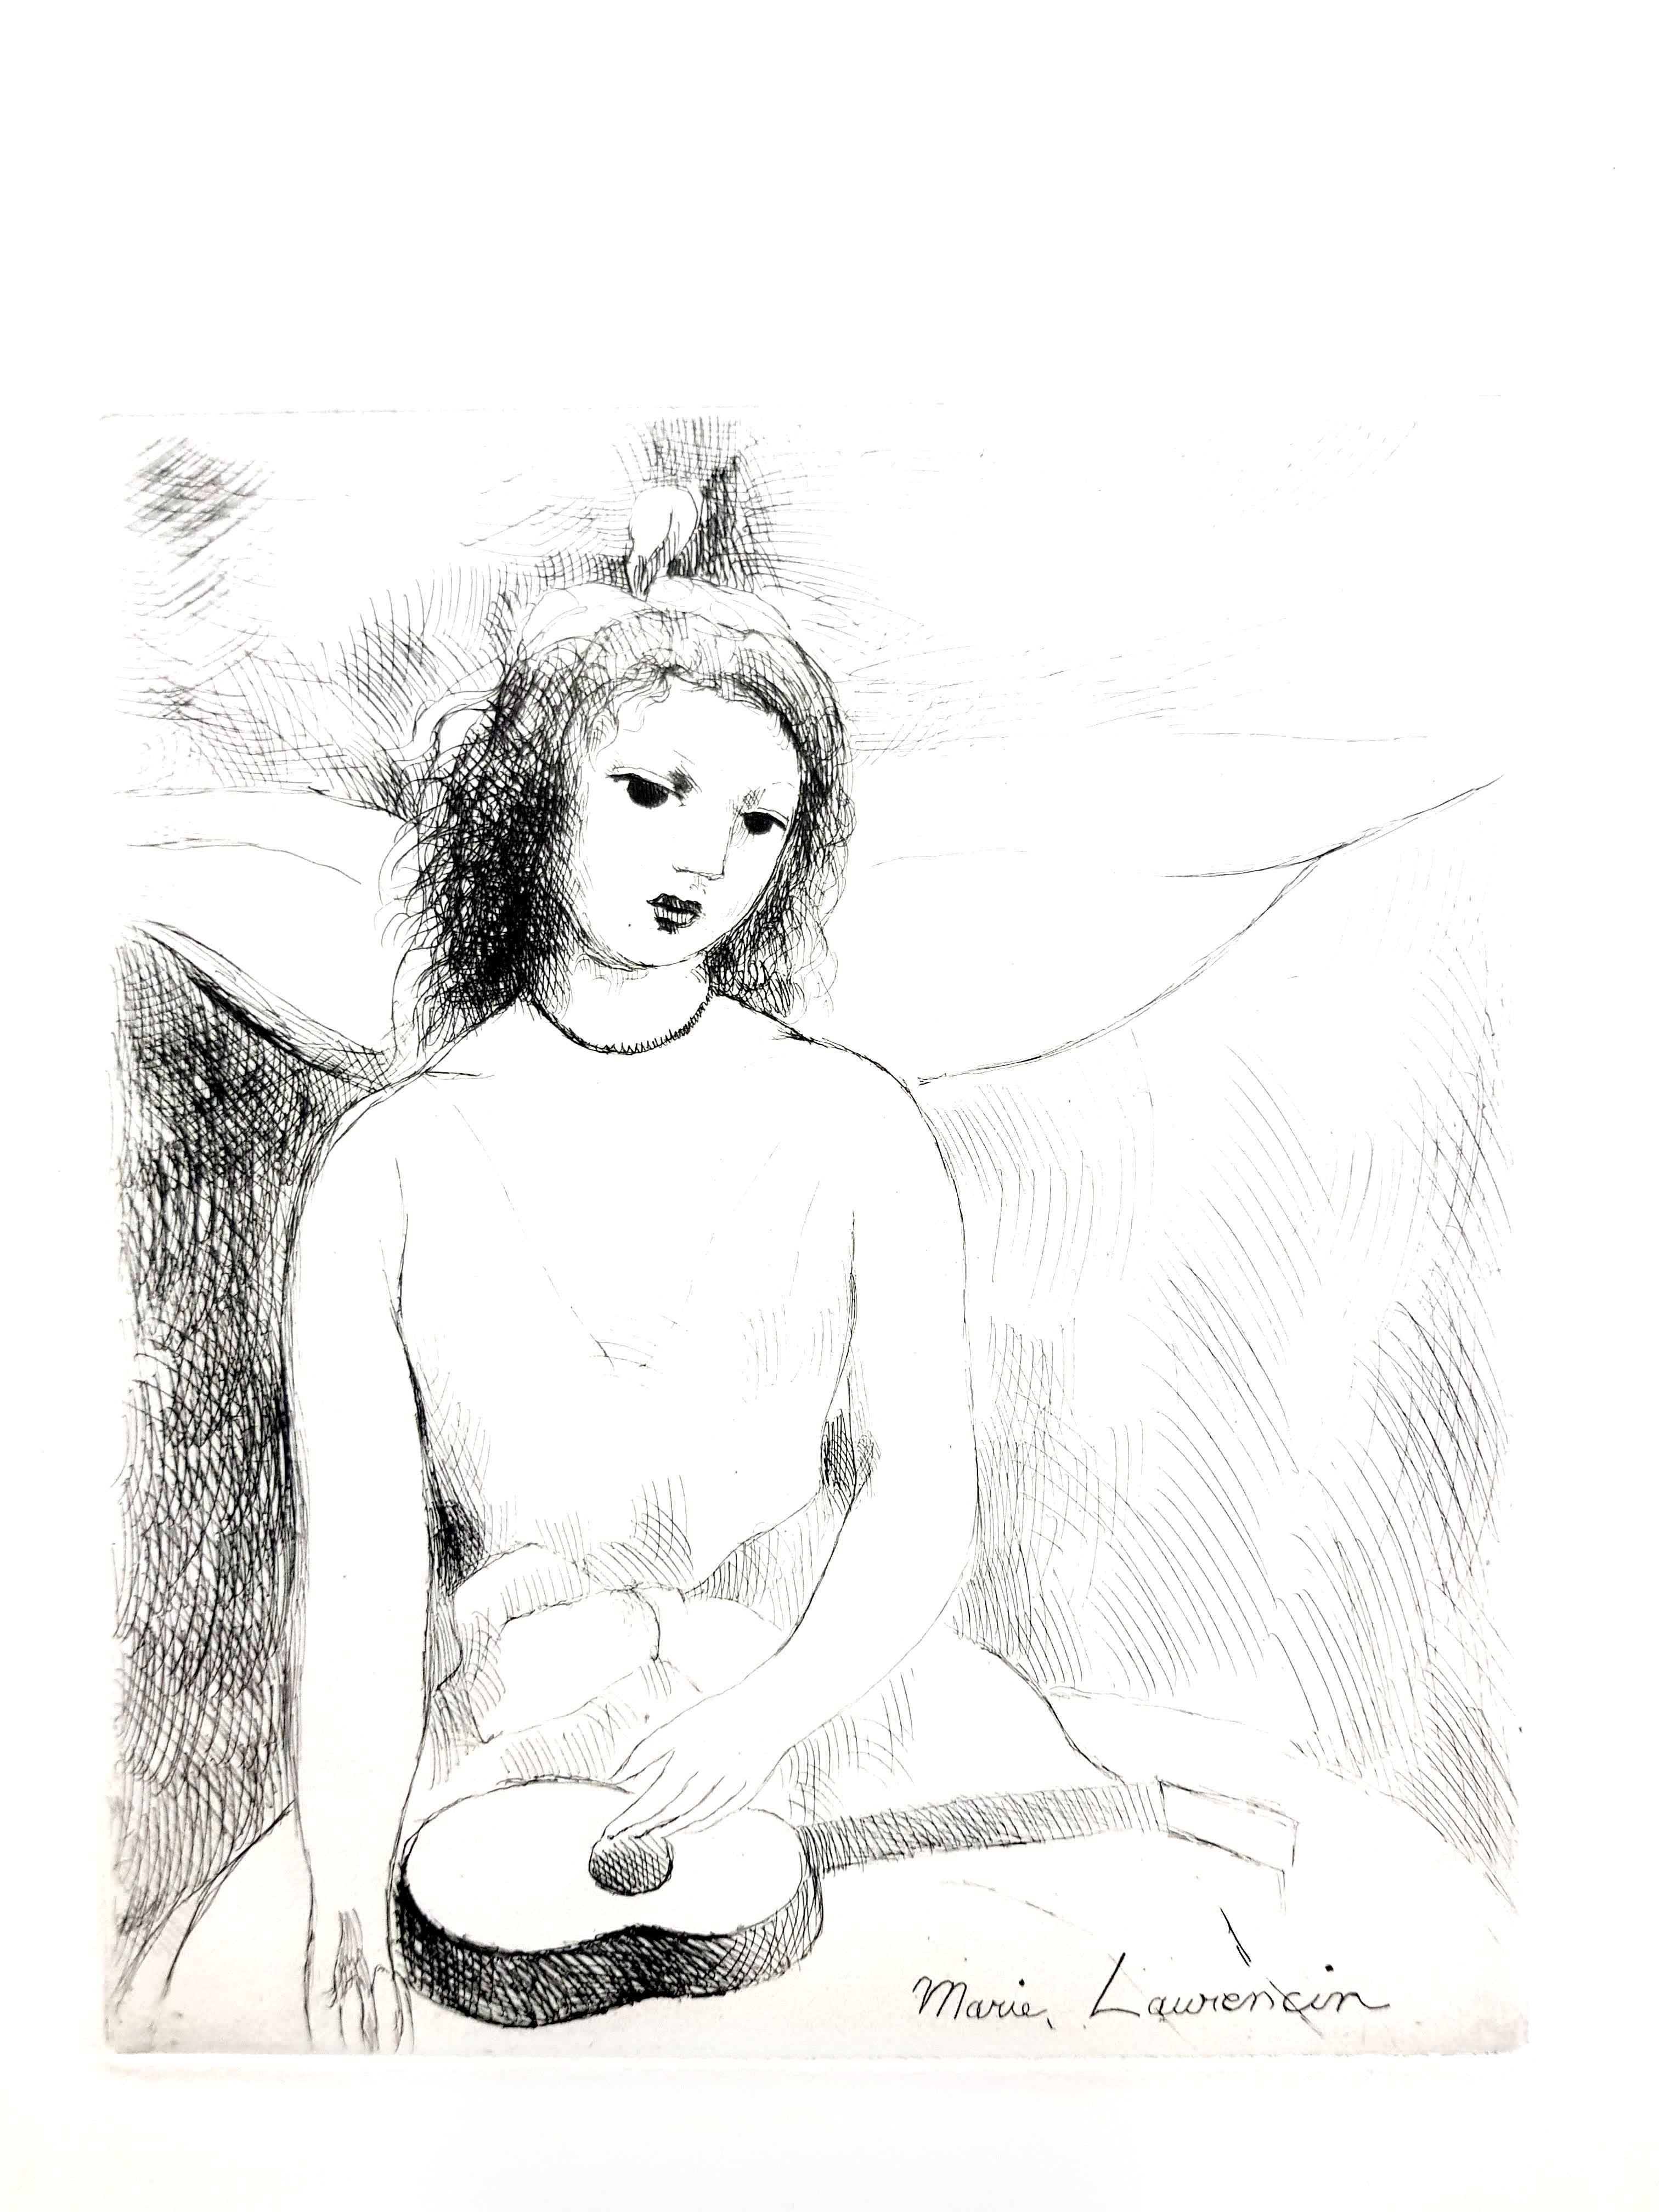 Marie Laurencin - Woman Angel - Original Etching
Paris, Le Gerbier, 1946
Edition of 340

Marie Laurencin (1883-1956)

Marie Laurencin went to Sèvres at the age of eighteen to receive instruction in porcelain painting. She subsequently continued her